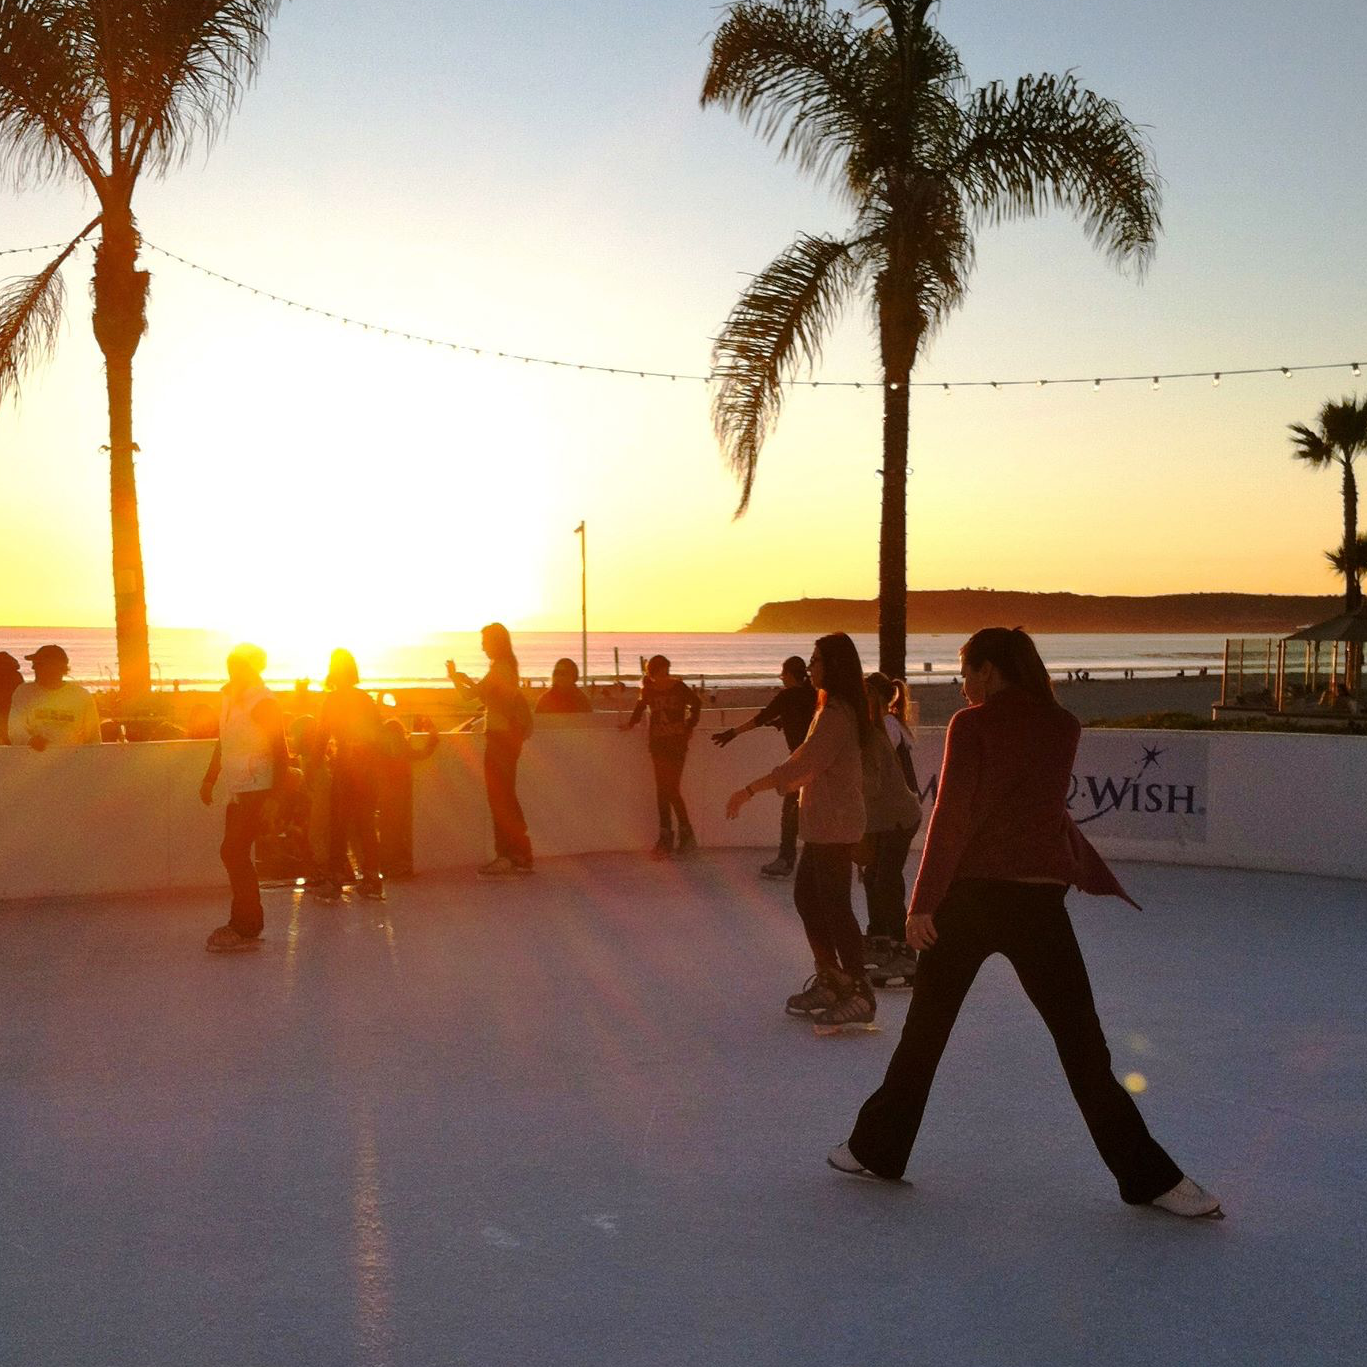 Skating on the beach: Only in San Diego!